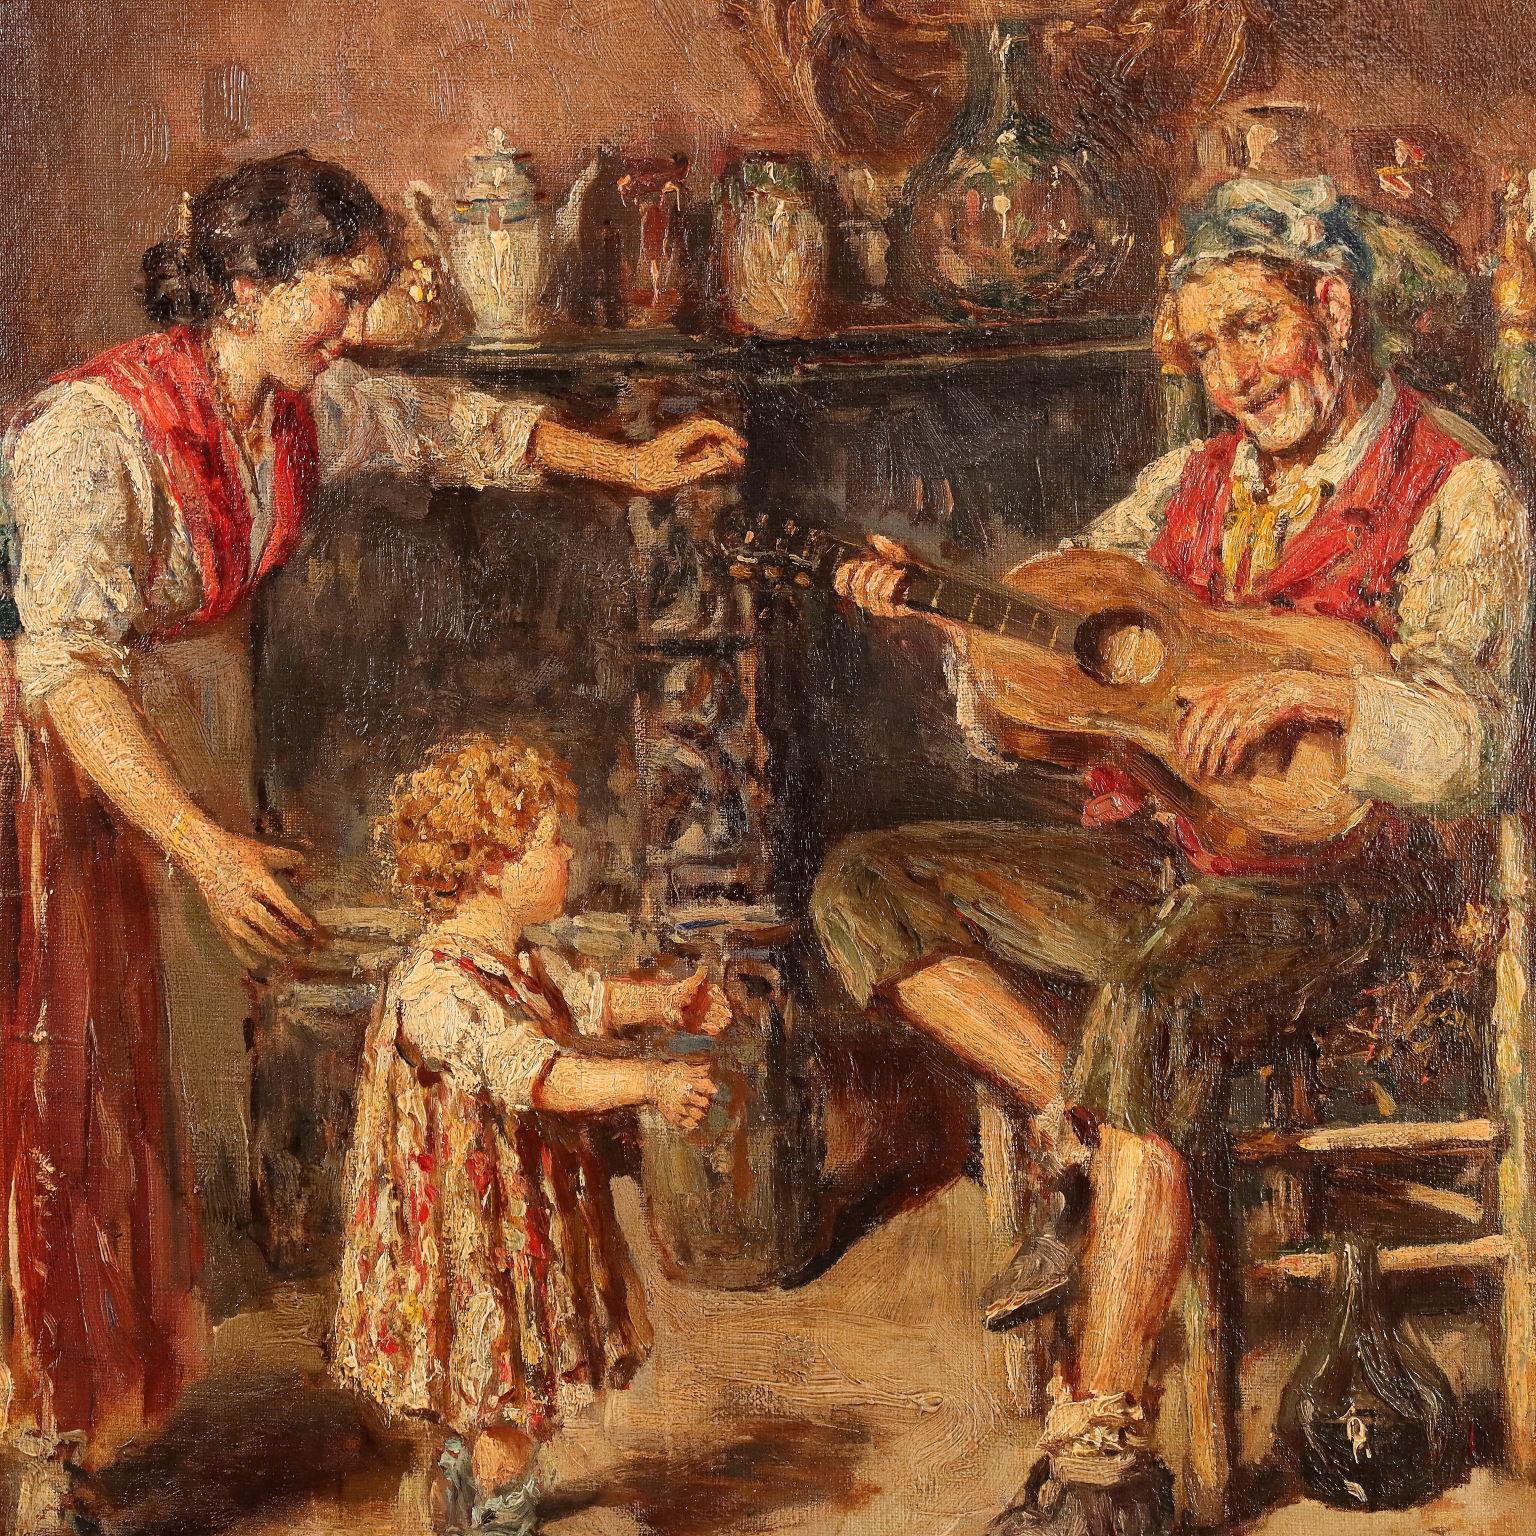 Unknown Figurative Painting - Painting with Scene of Domestic Concertino, early 20th century